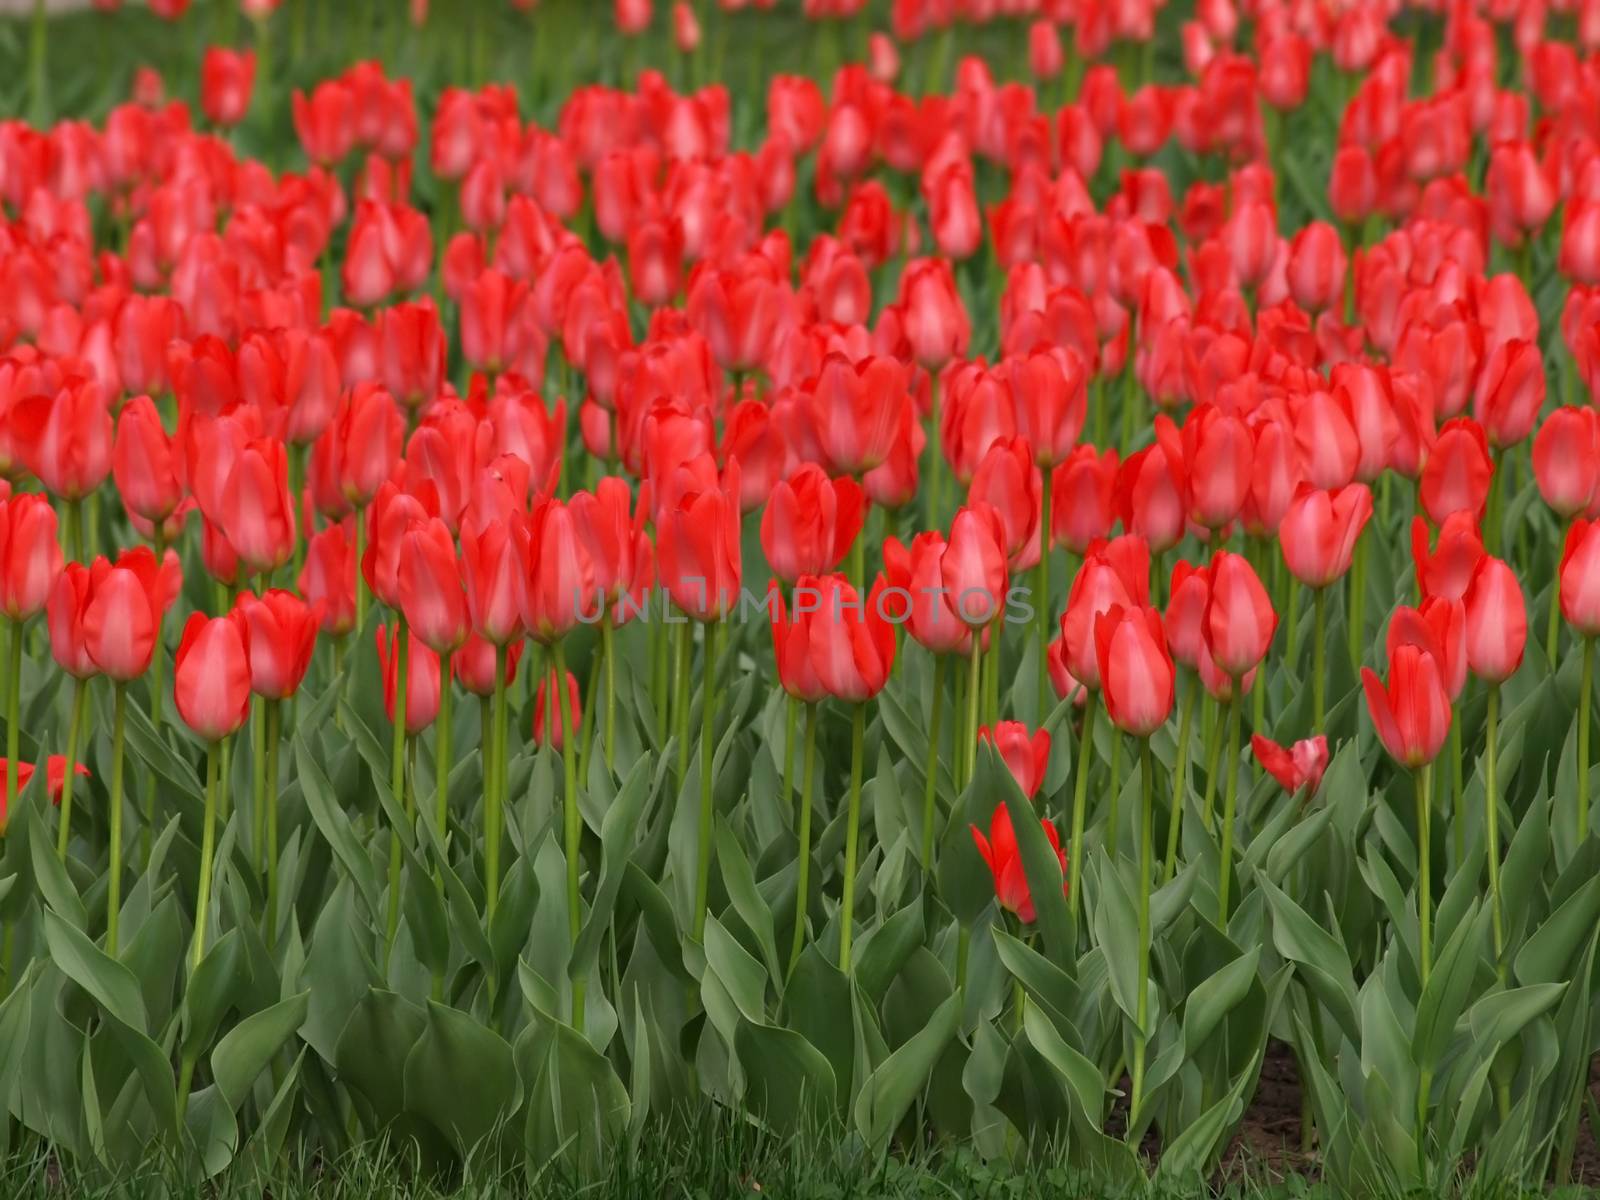 more tulips red field by Venakr